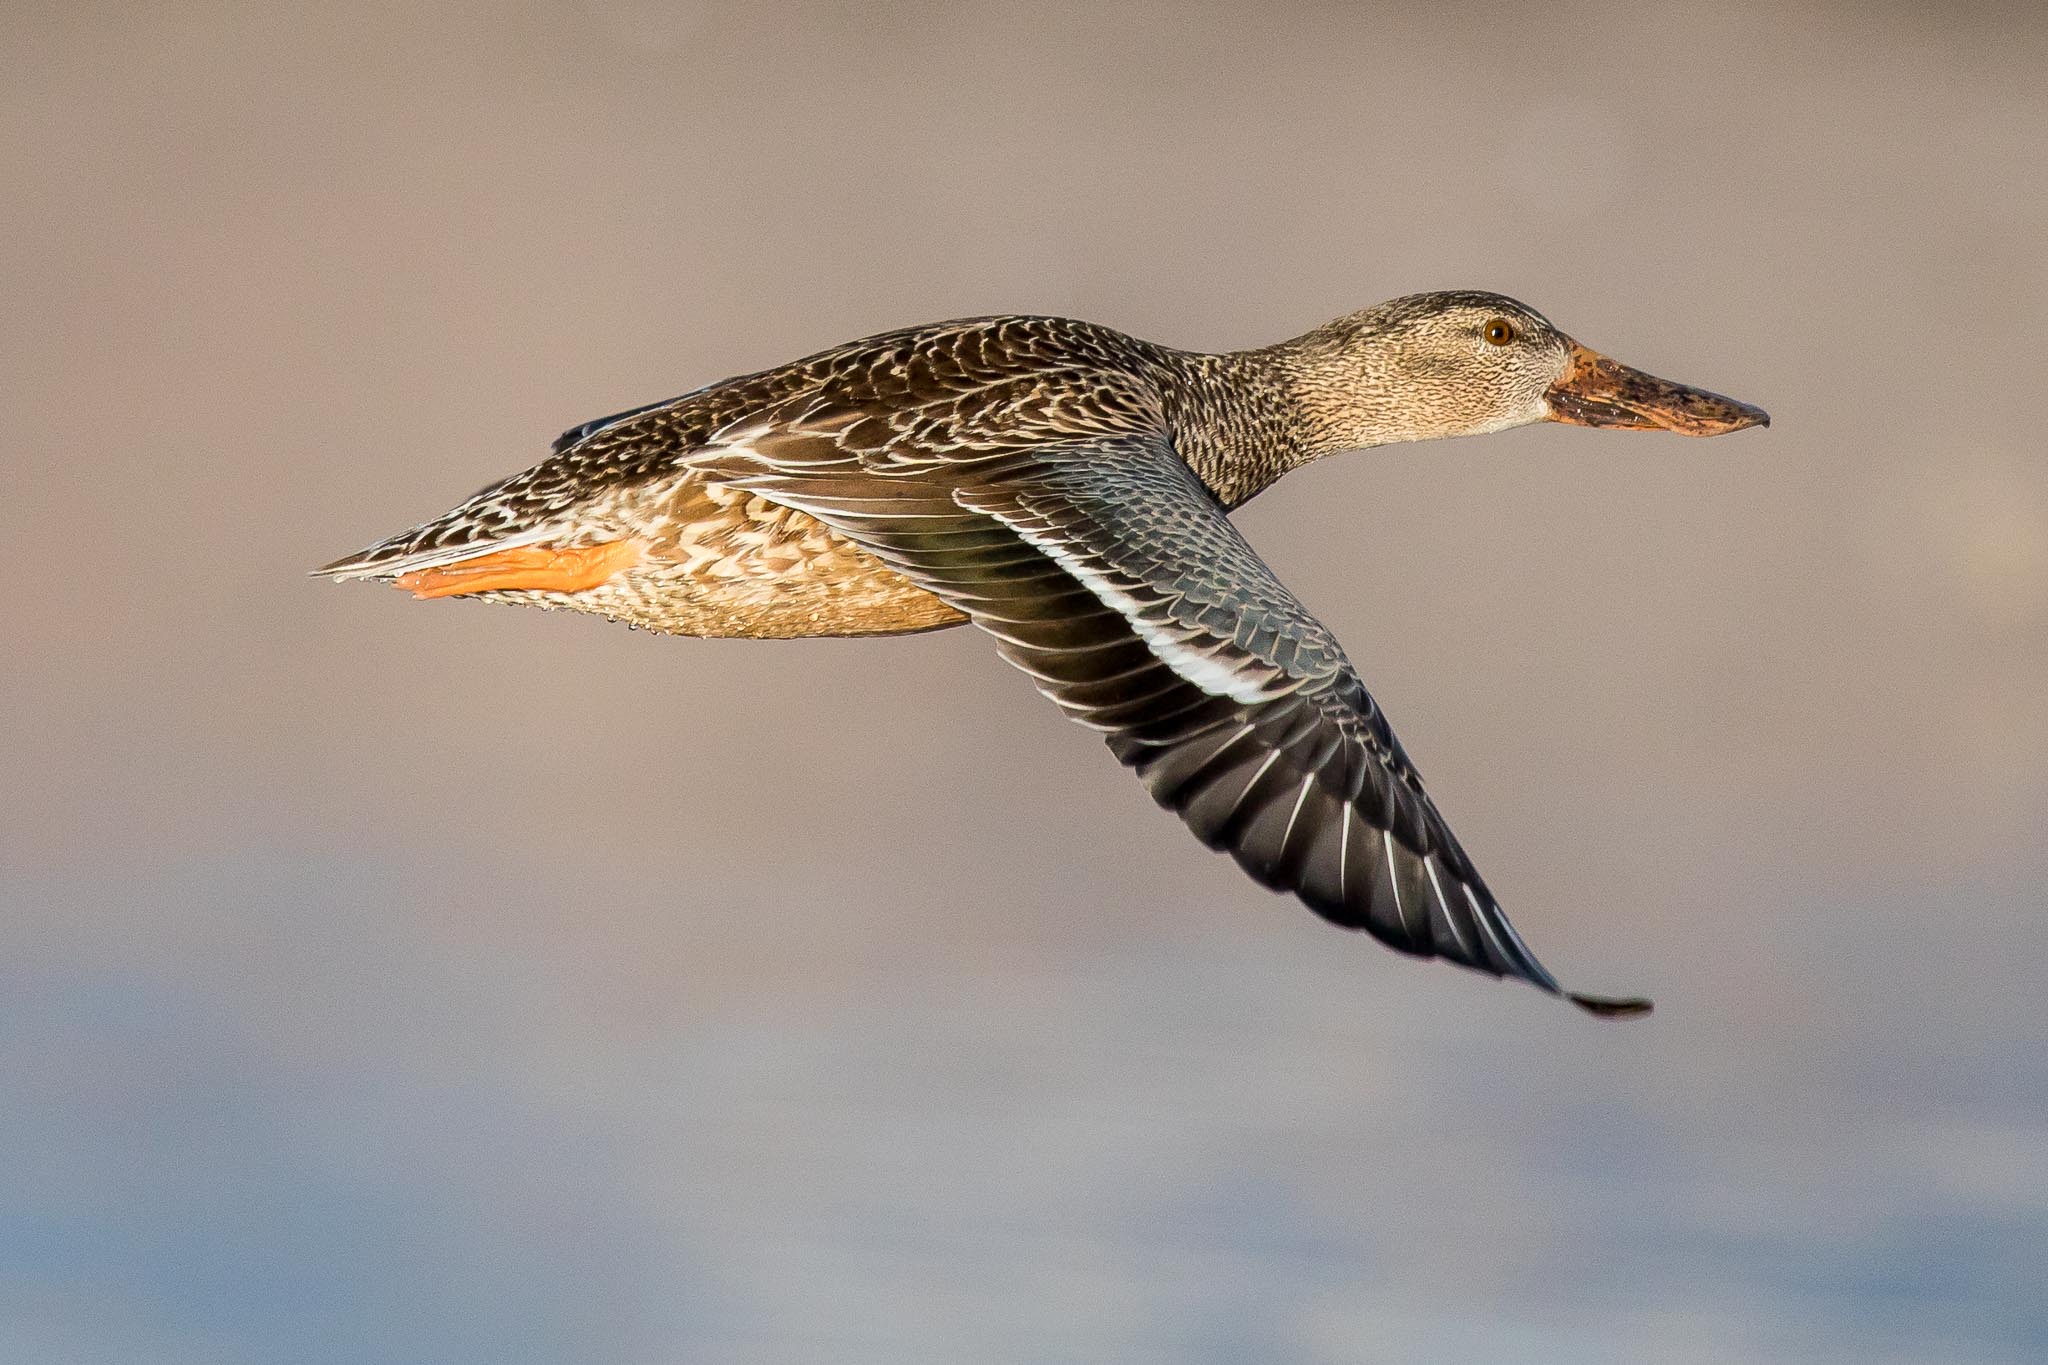 Female Northern Shoveler flying low over the pond, Bosque del Apache National Wildlife Refuge, San Antonio NM, January 5, 2017